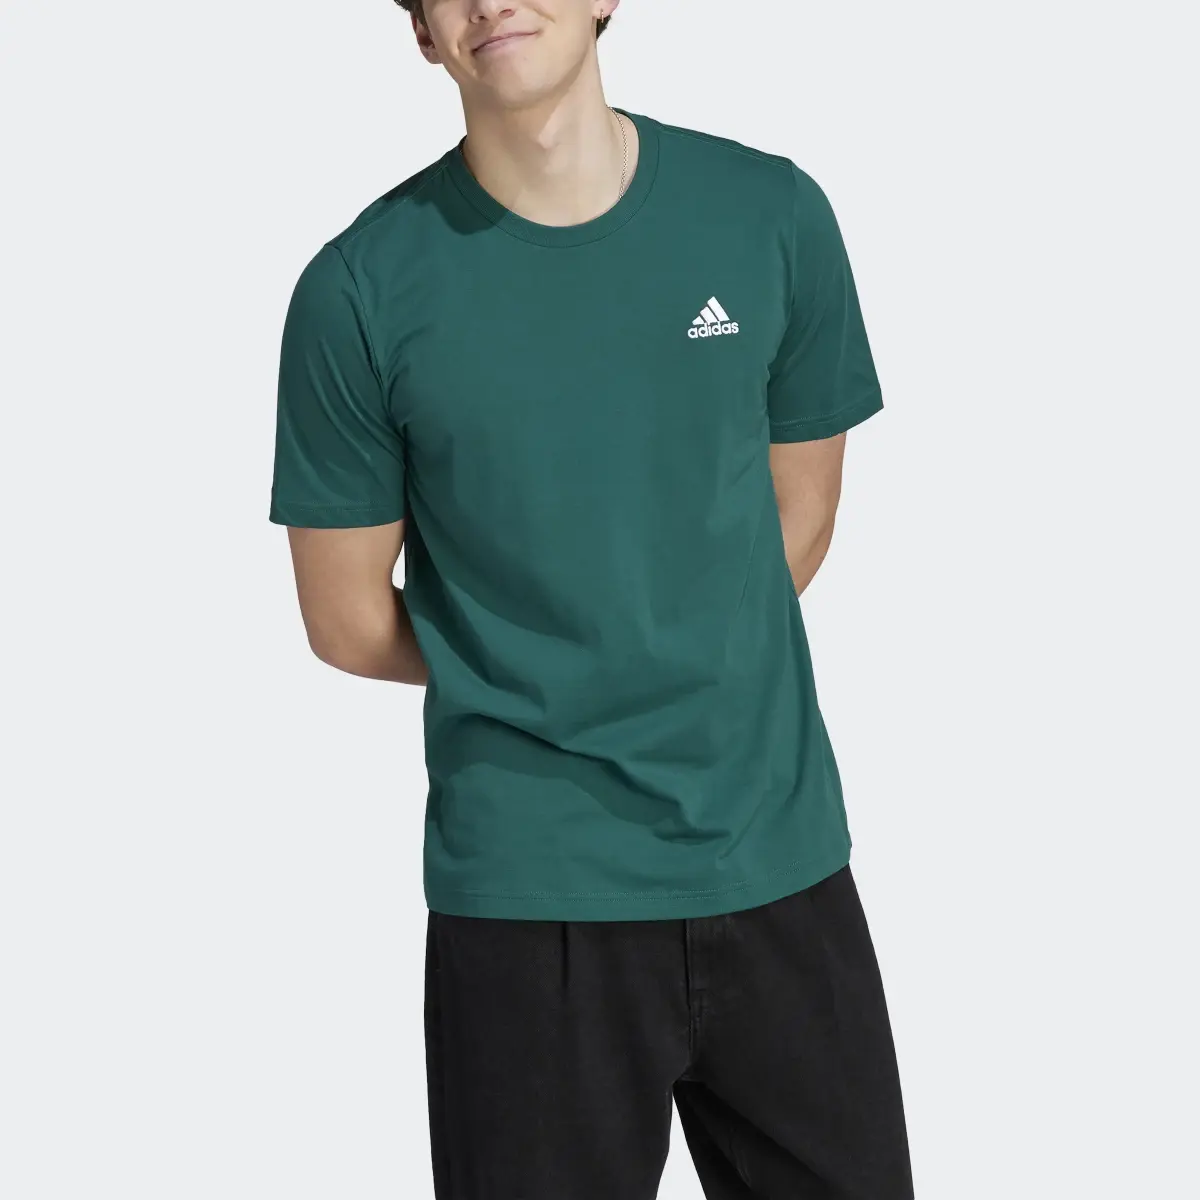 Adidas T-shirt Essentials Single Jersey Embroidered Small Logo. 1